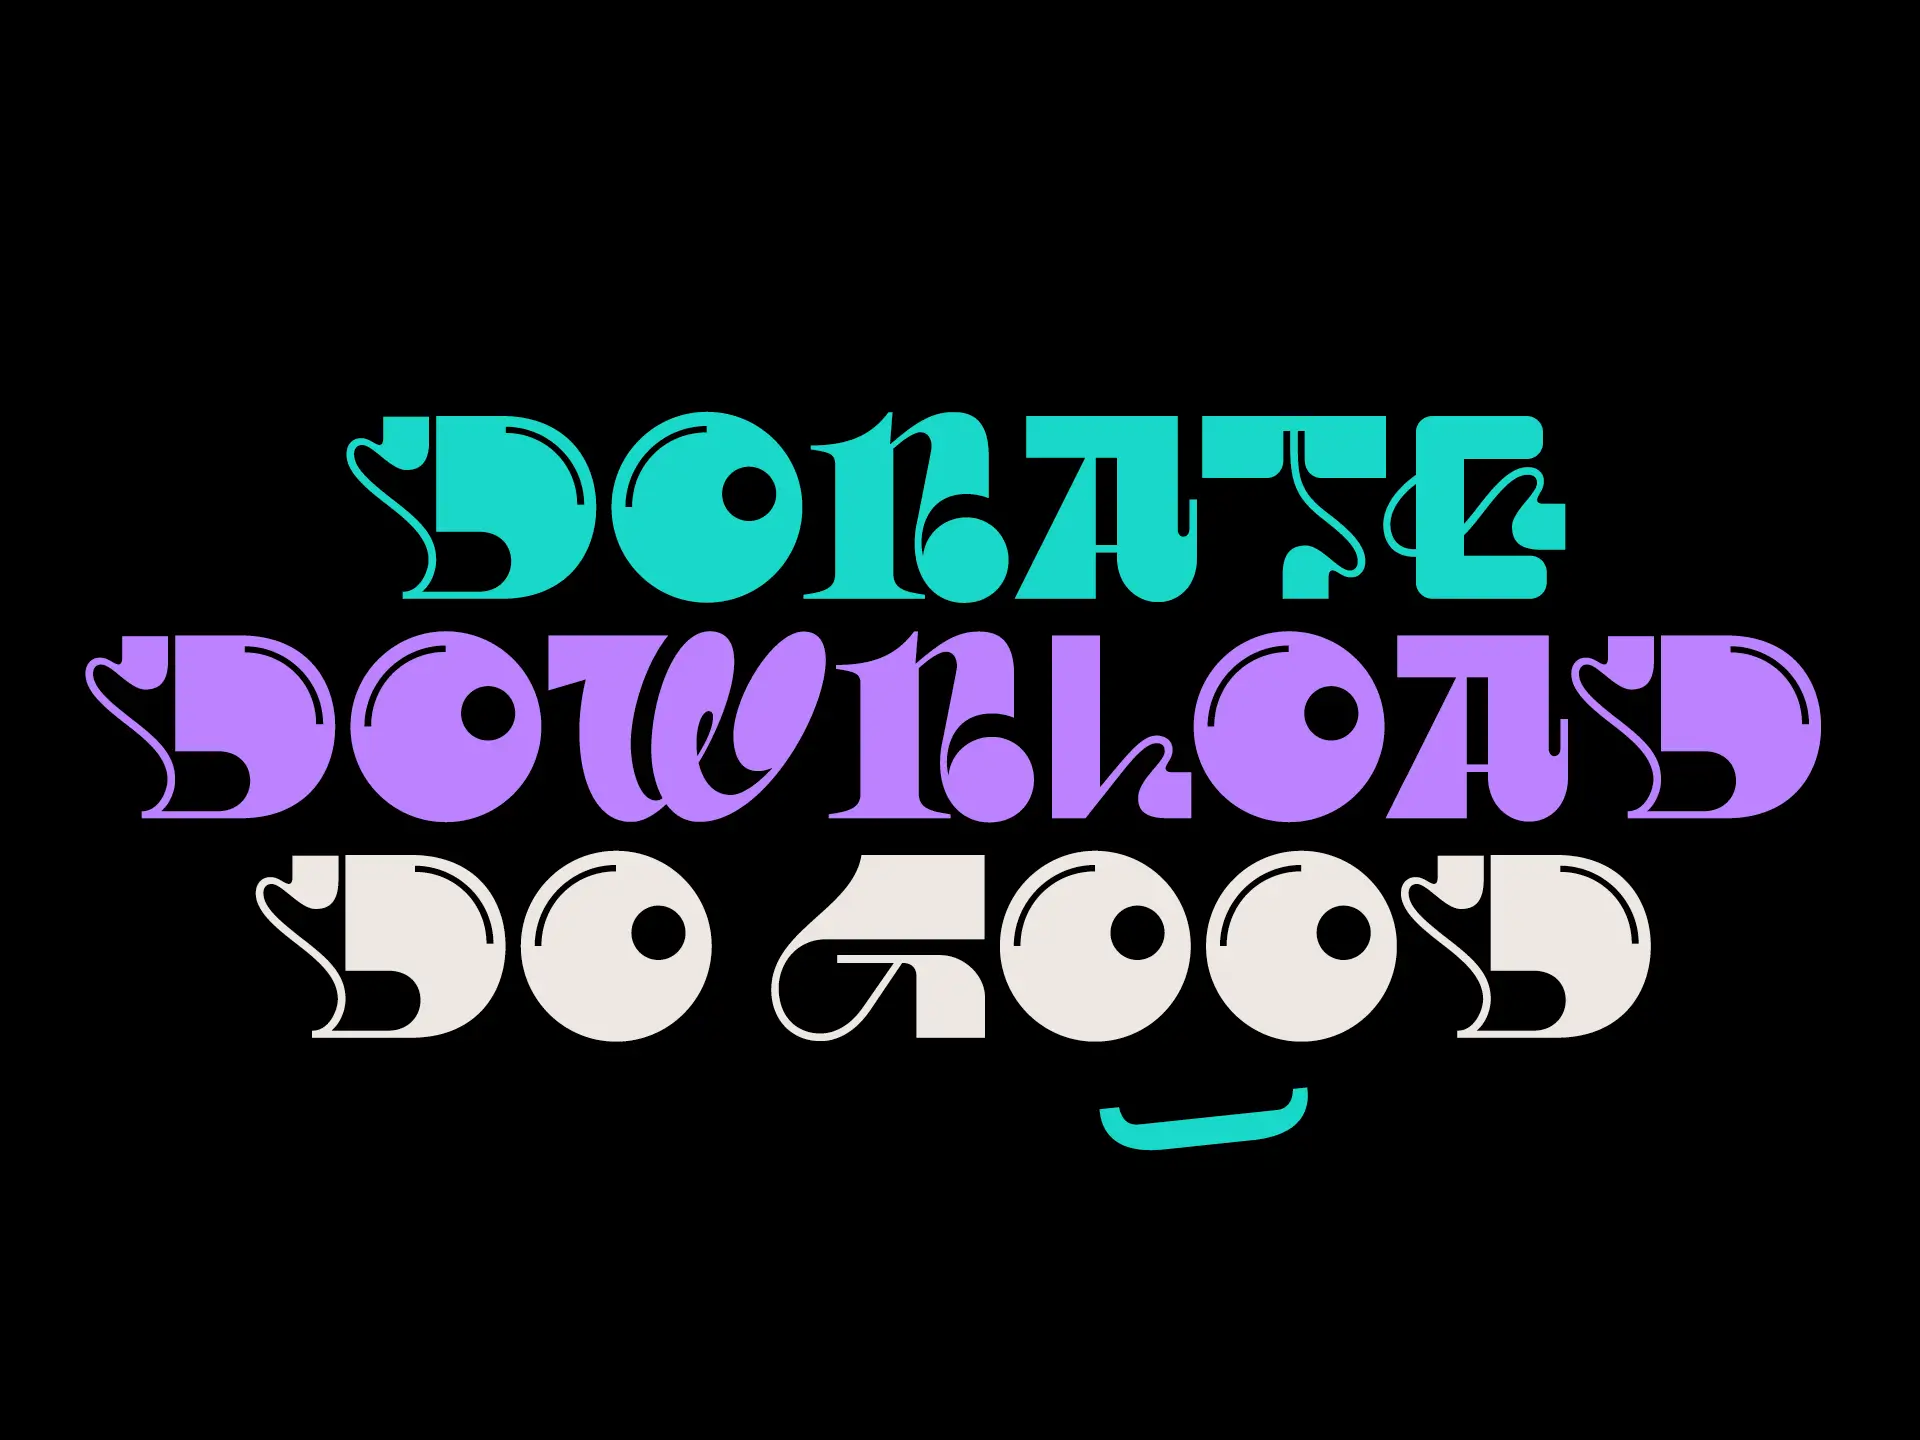 Maggy font speciment reading "Donate, Download, Do Good"